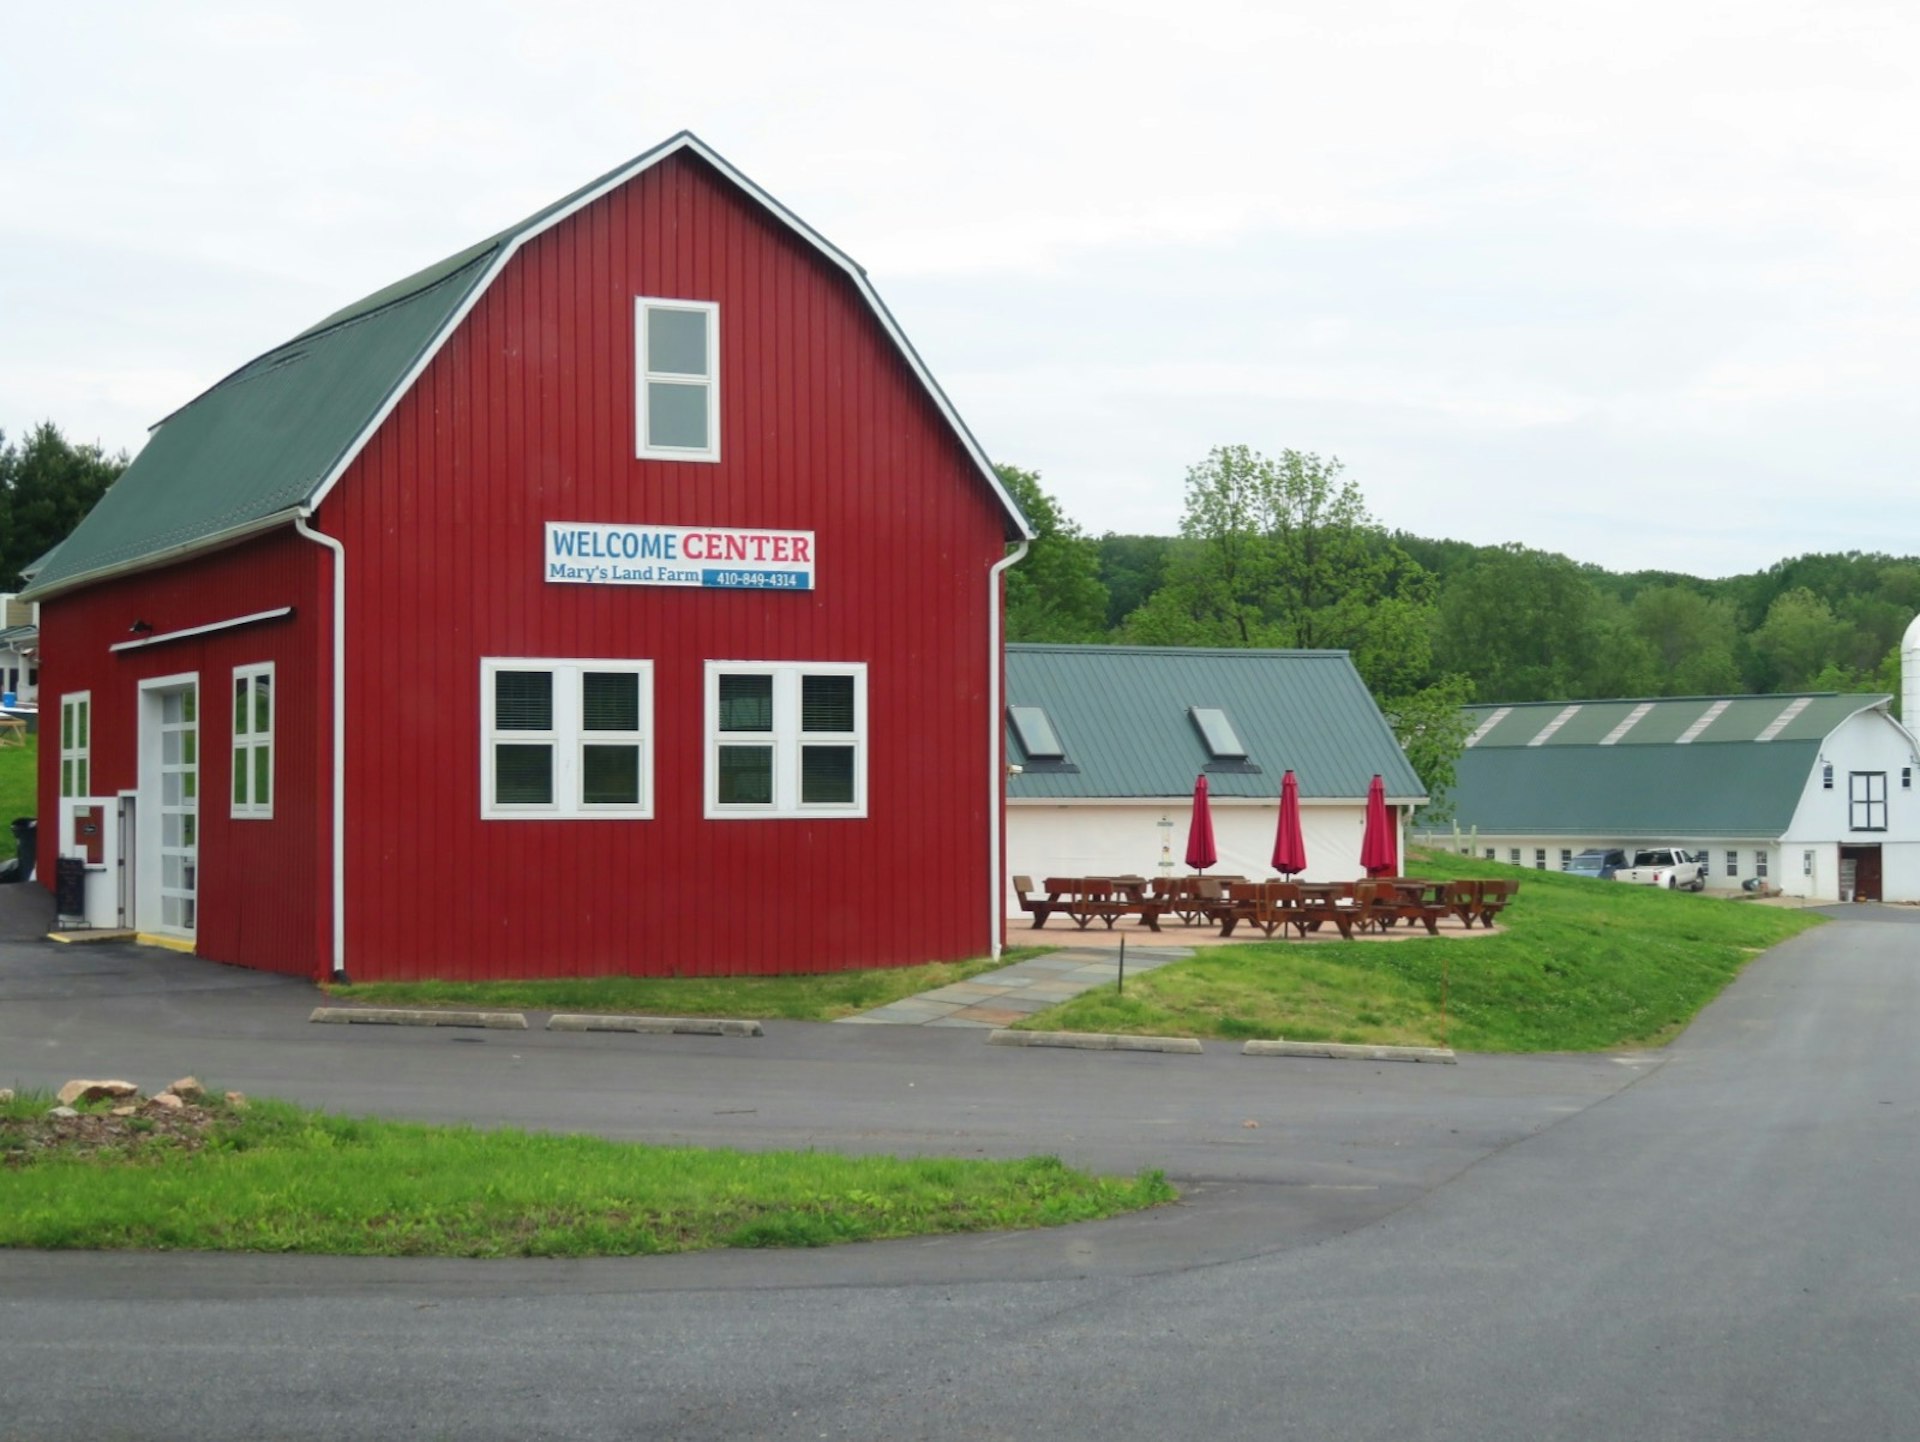 A large red barn surrounded by other buildings in Howard County, Maryland